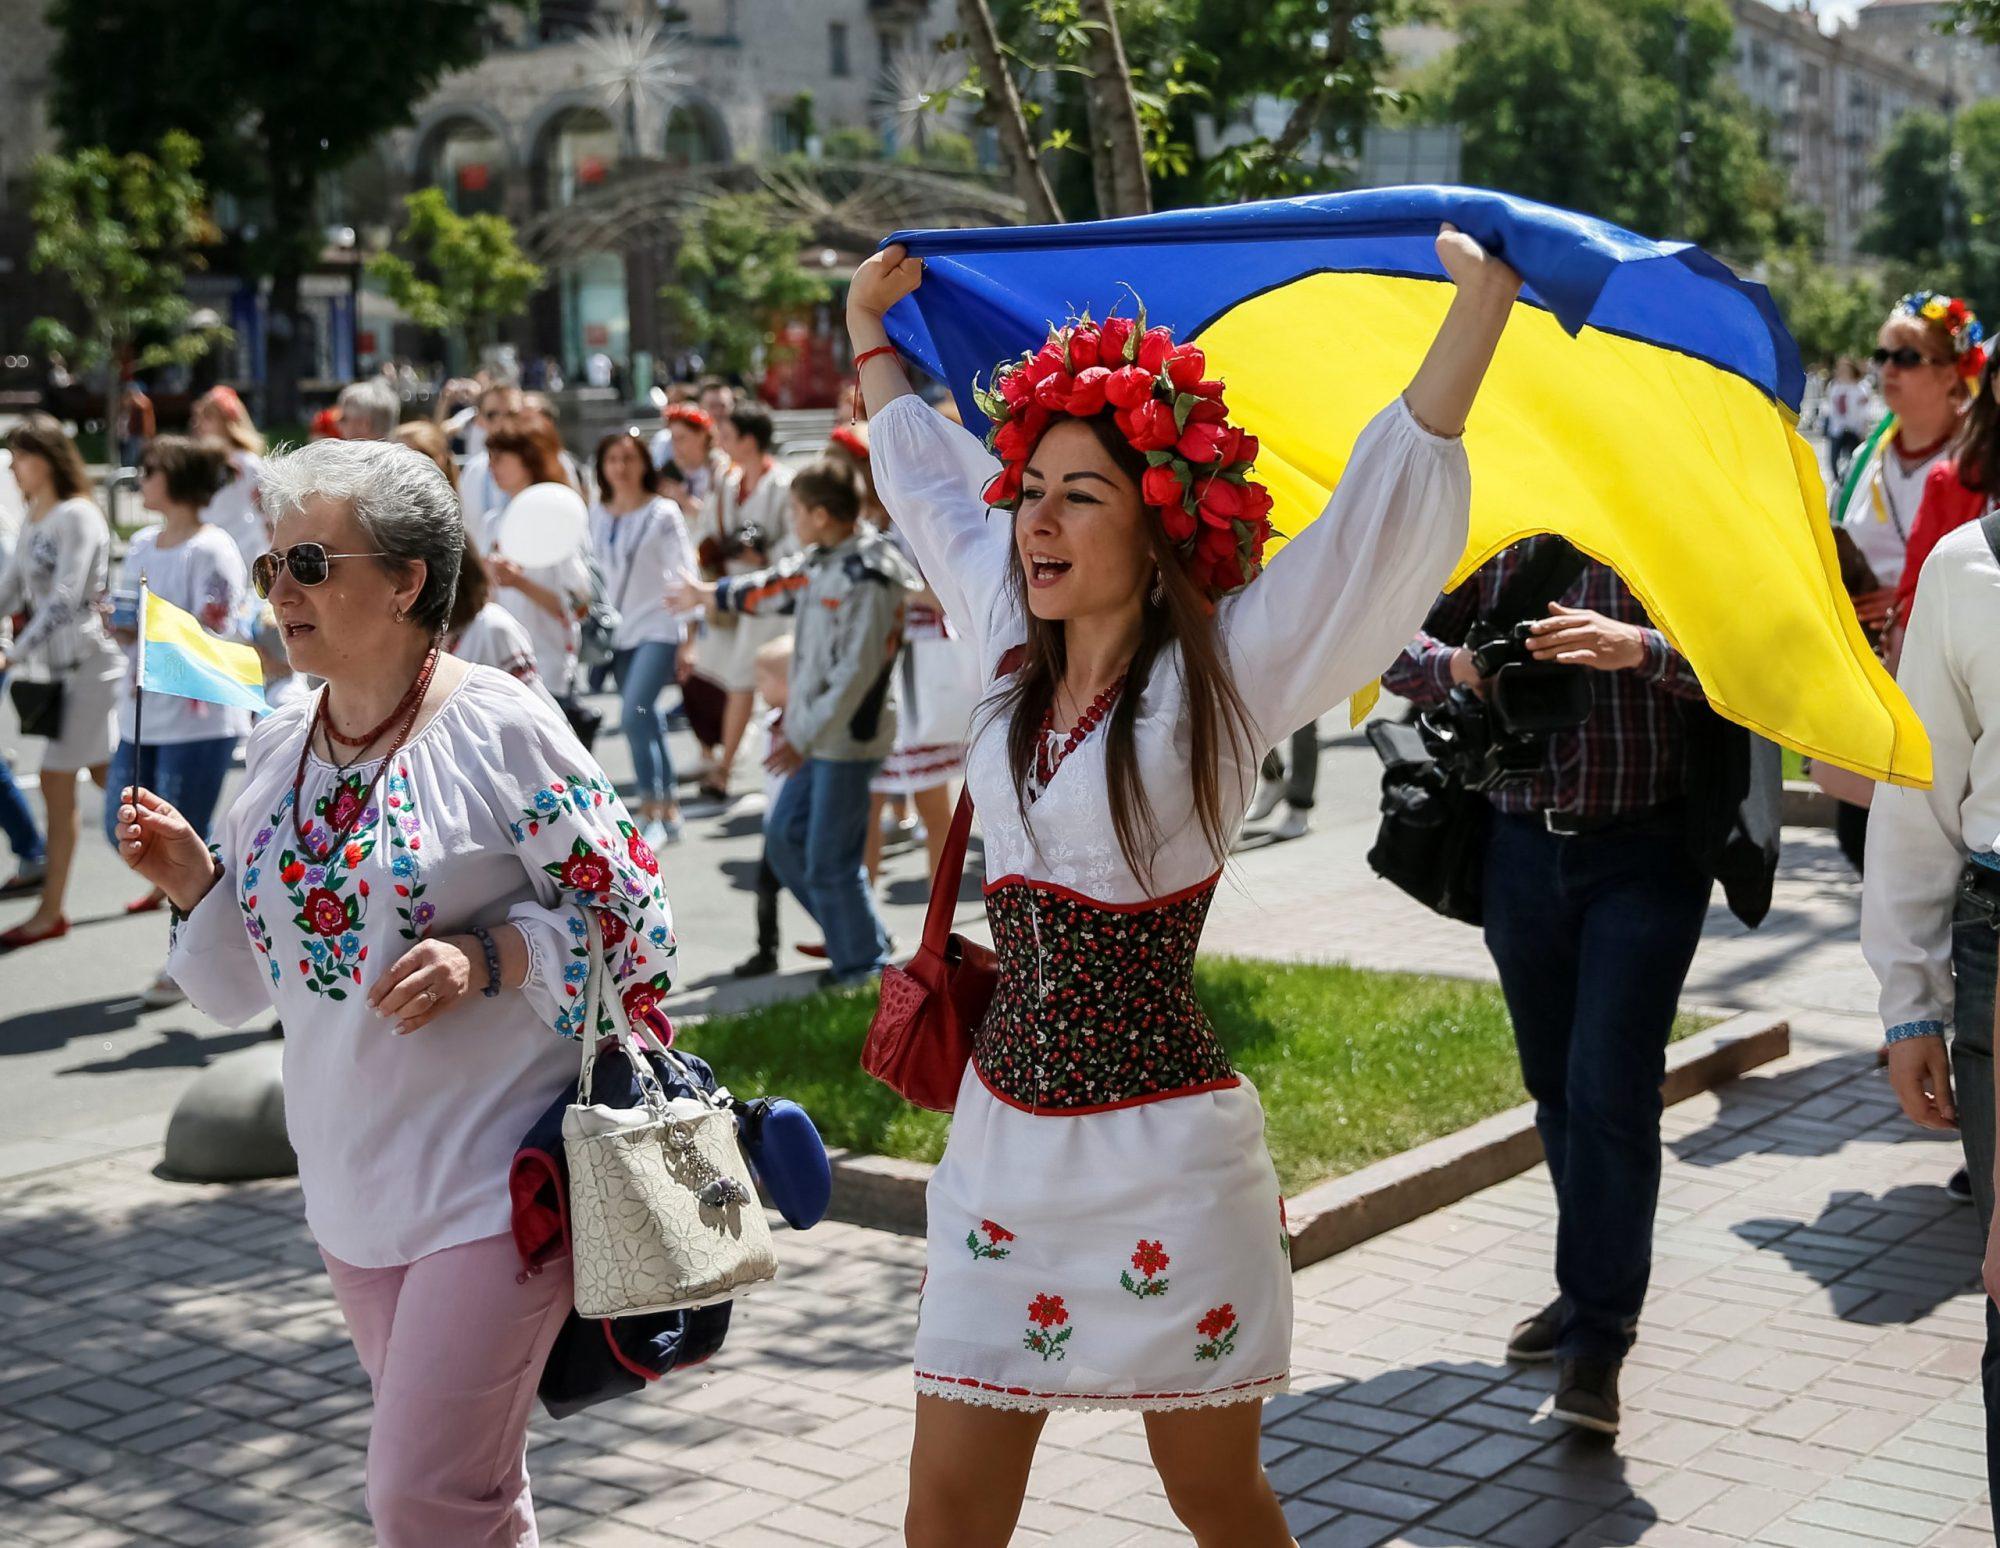 2023 was declared the Year of Ukrainian Culture in Moldova